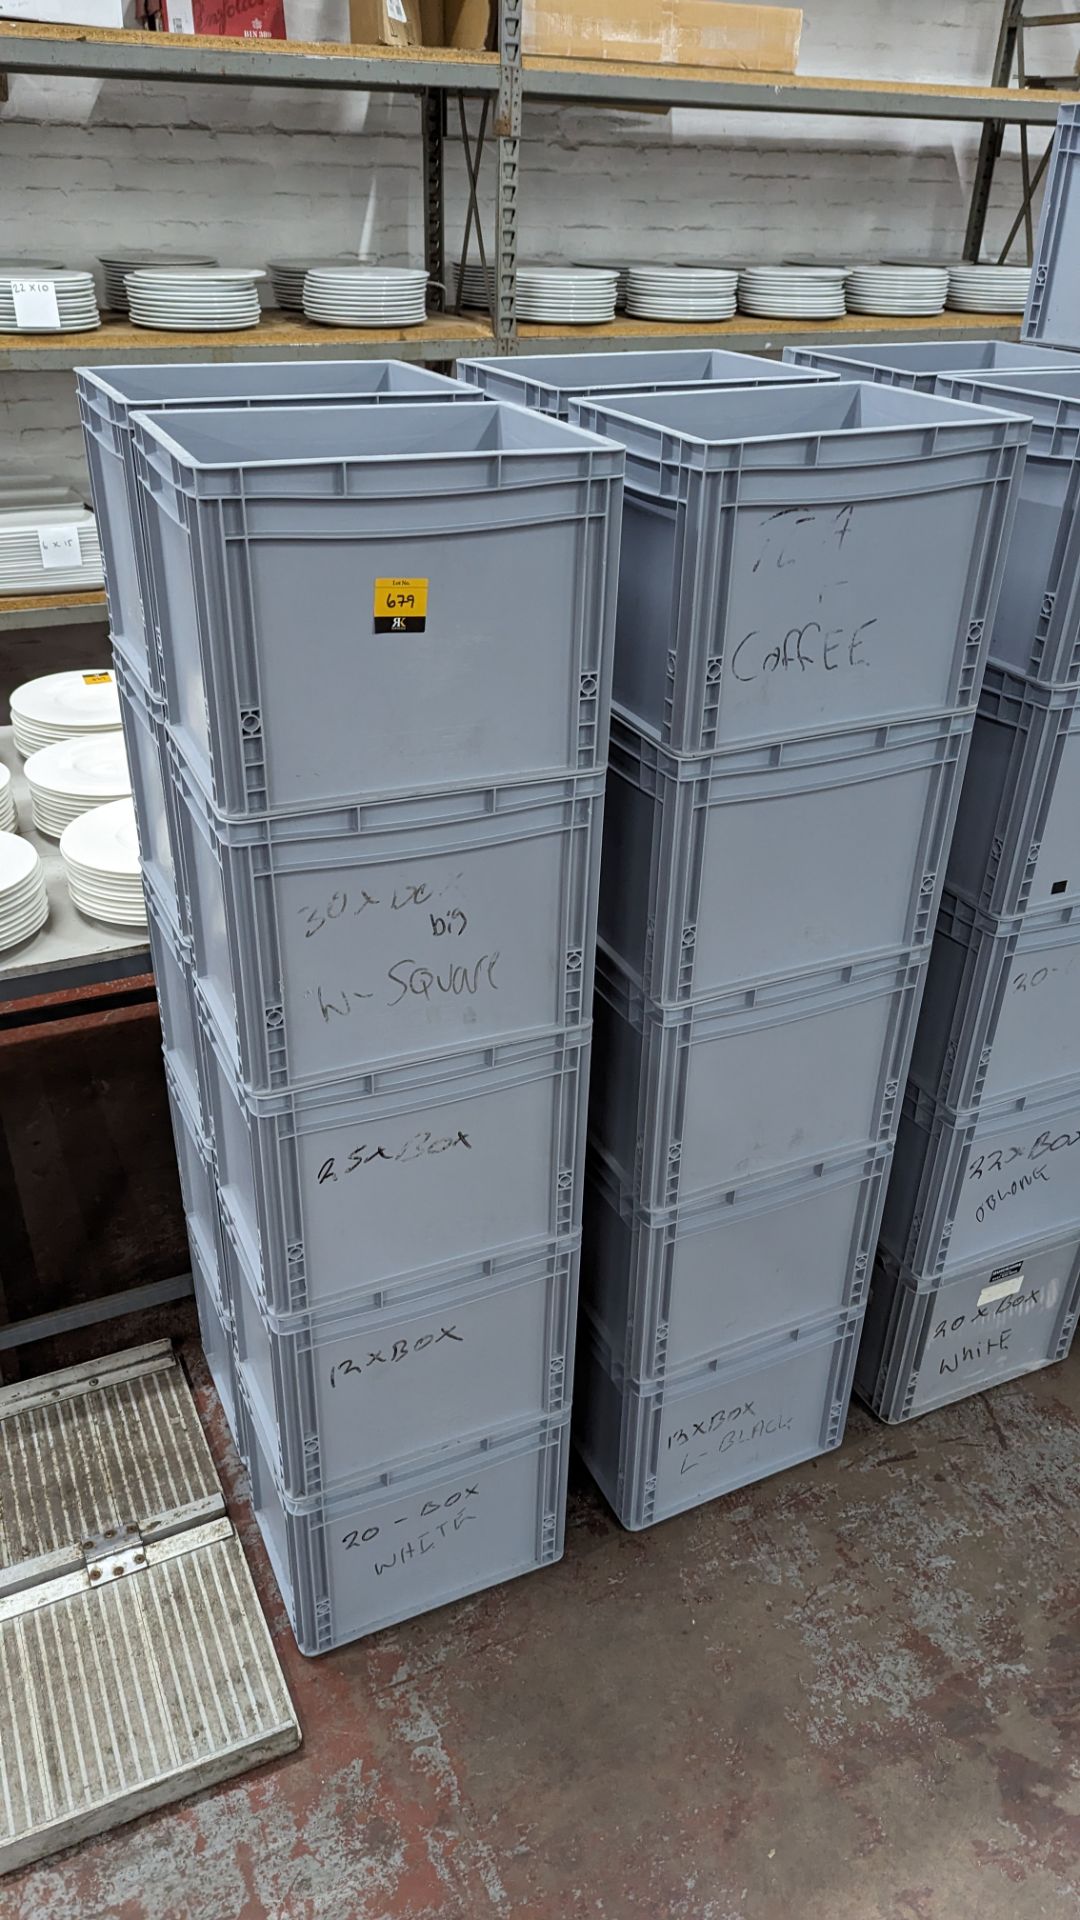 20 off matching pale grey stacking plastic crates each measuring approximately 400mm x 300mm x 300mm - Image 2 of 4